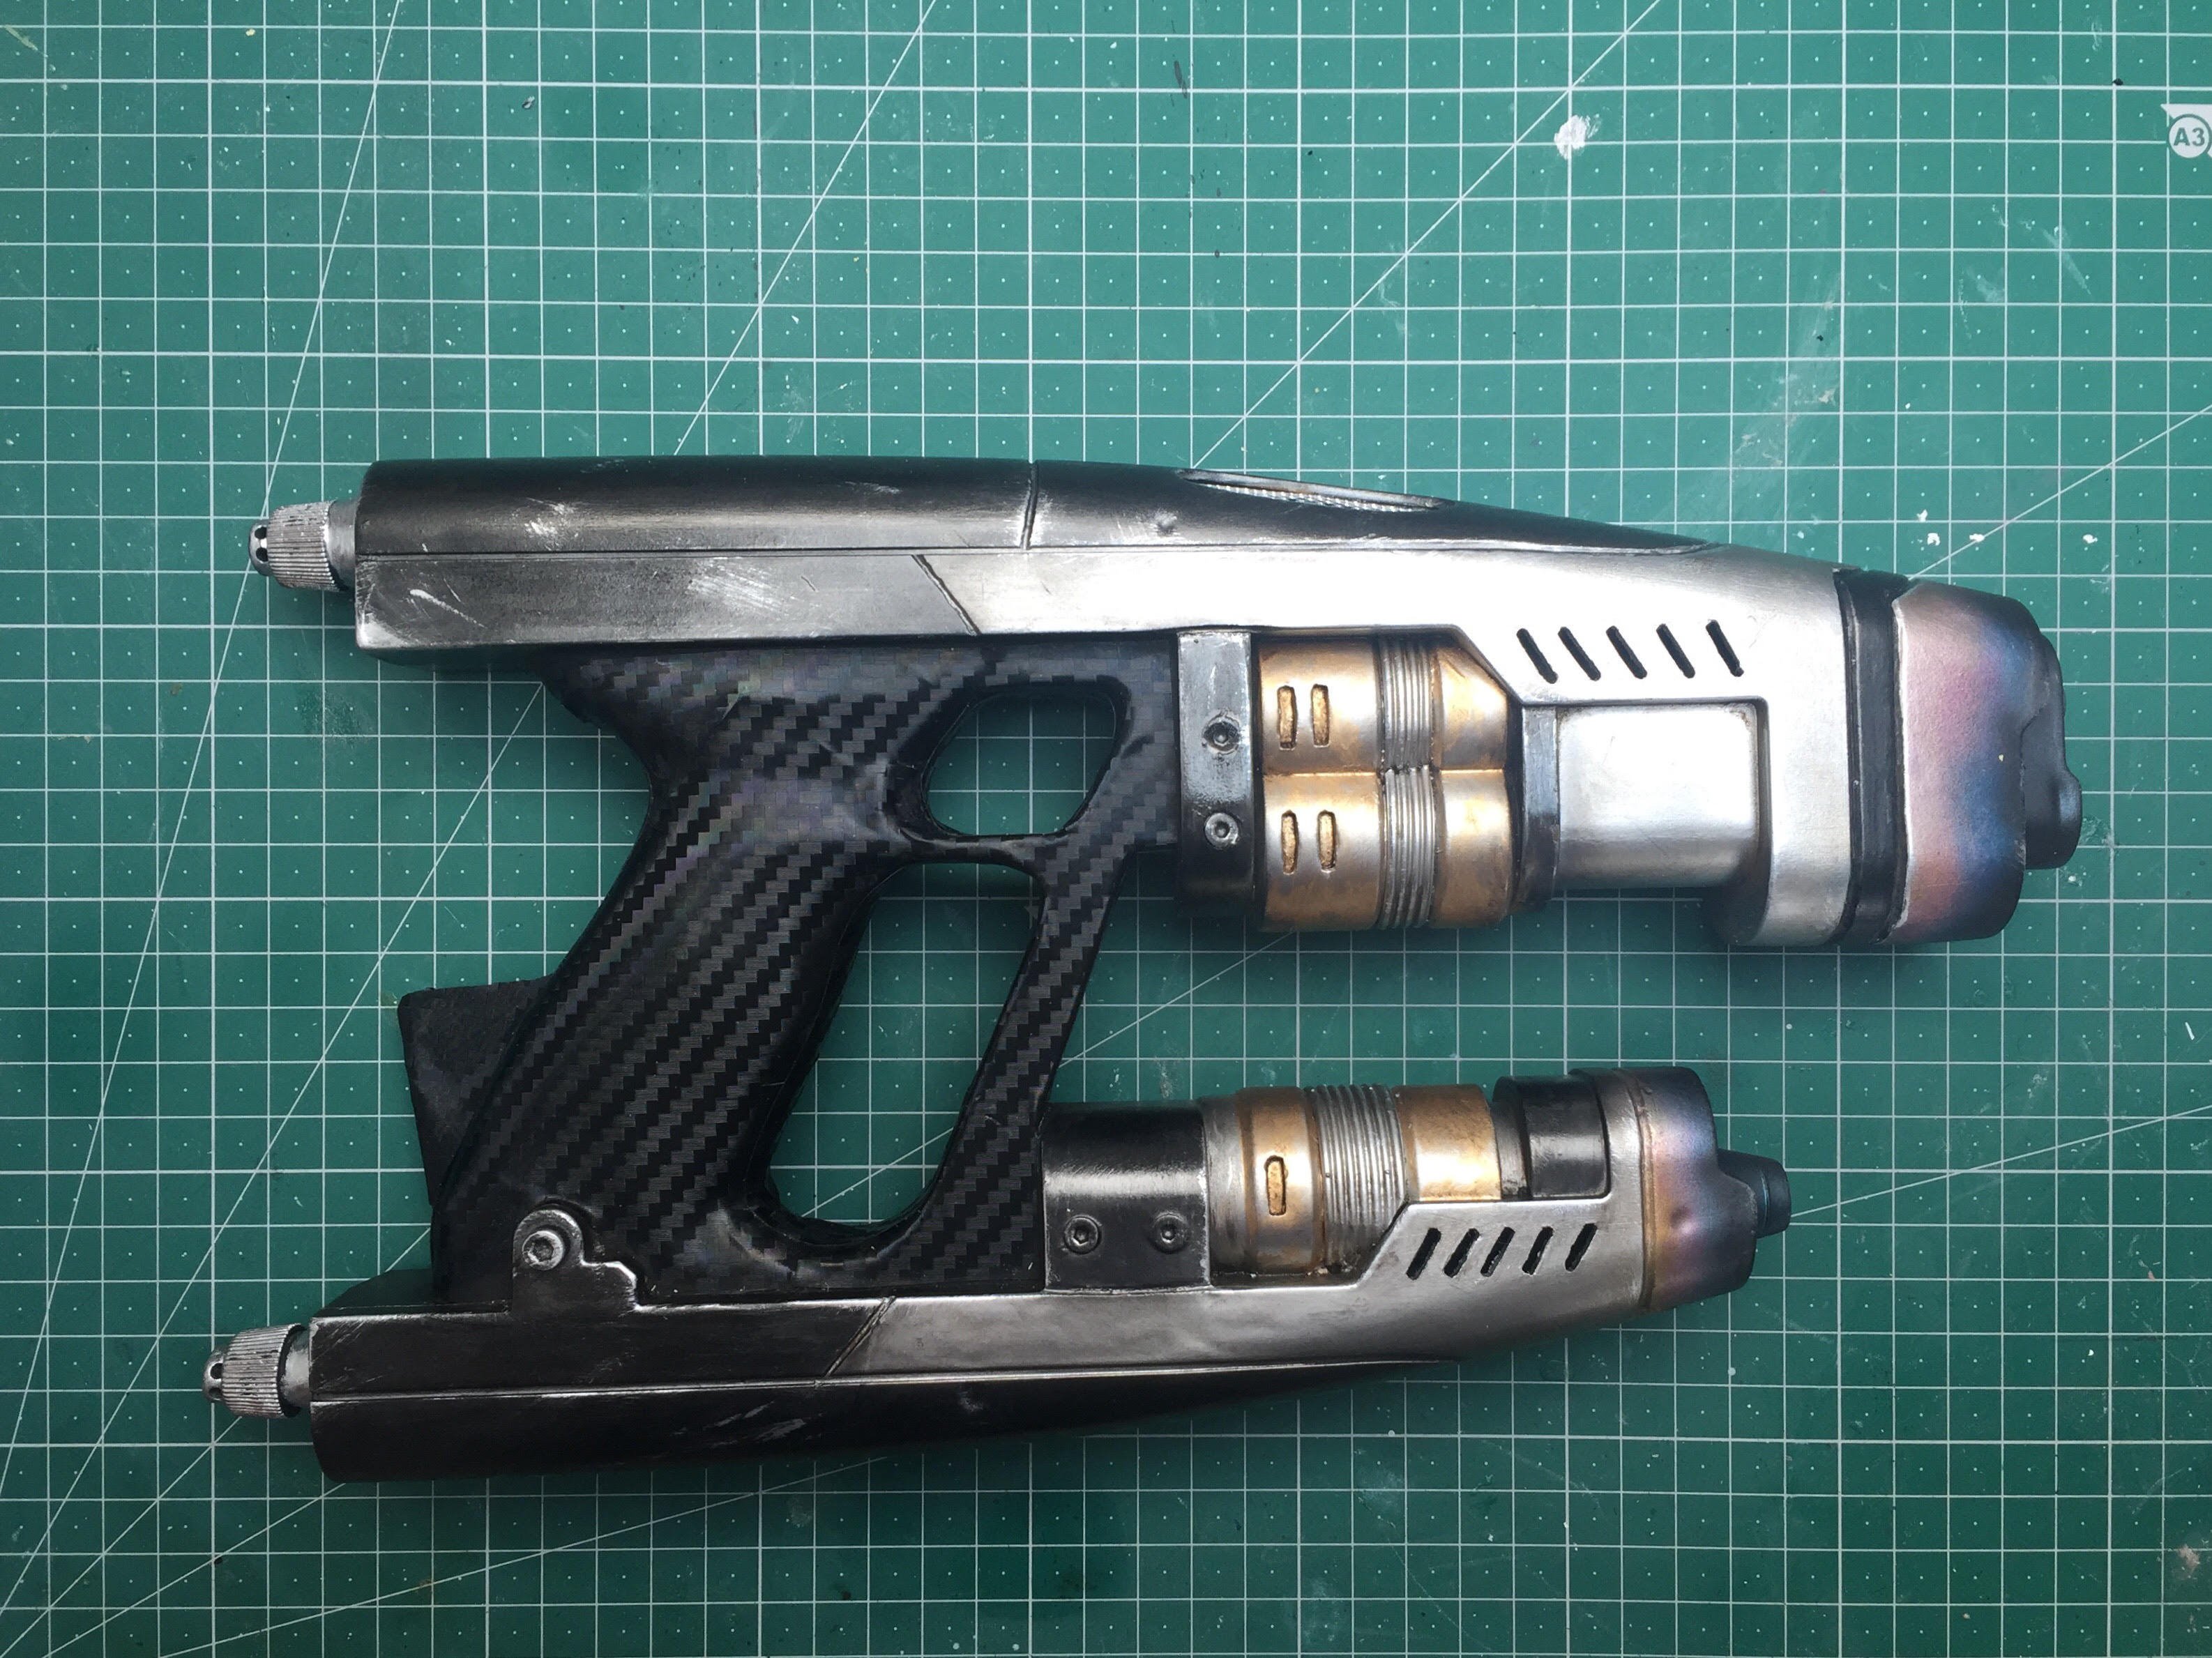 Starlord's blaster - Rubies mod and re-paint | RPF Costume and Prop Maker  Community